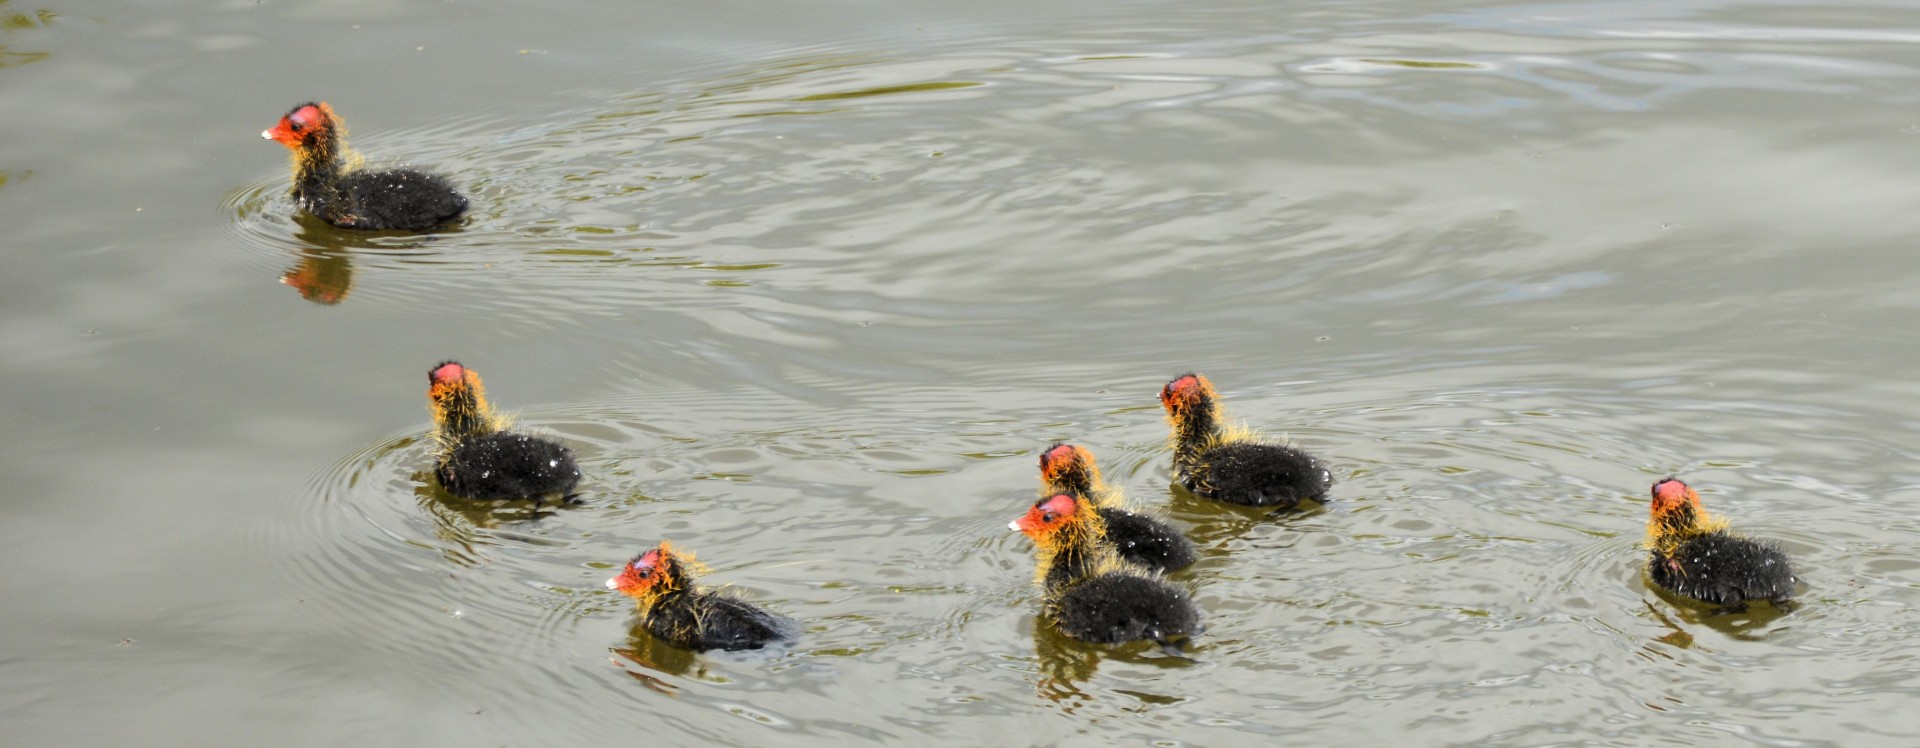 waterfowl young group free photo